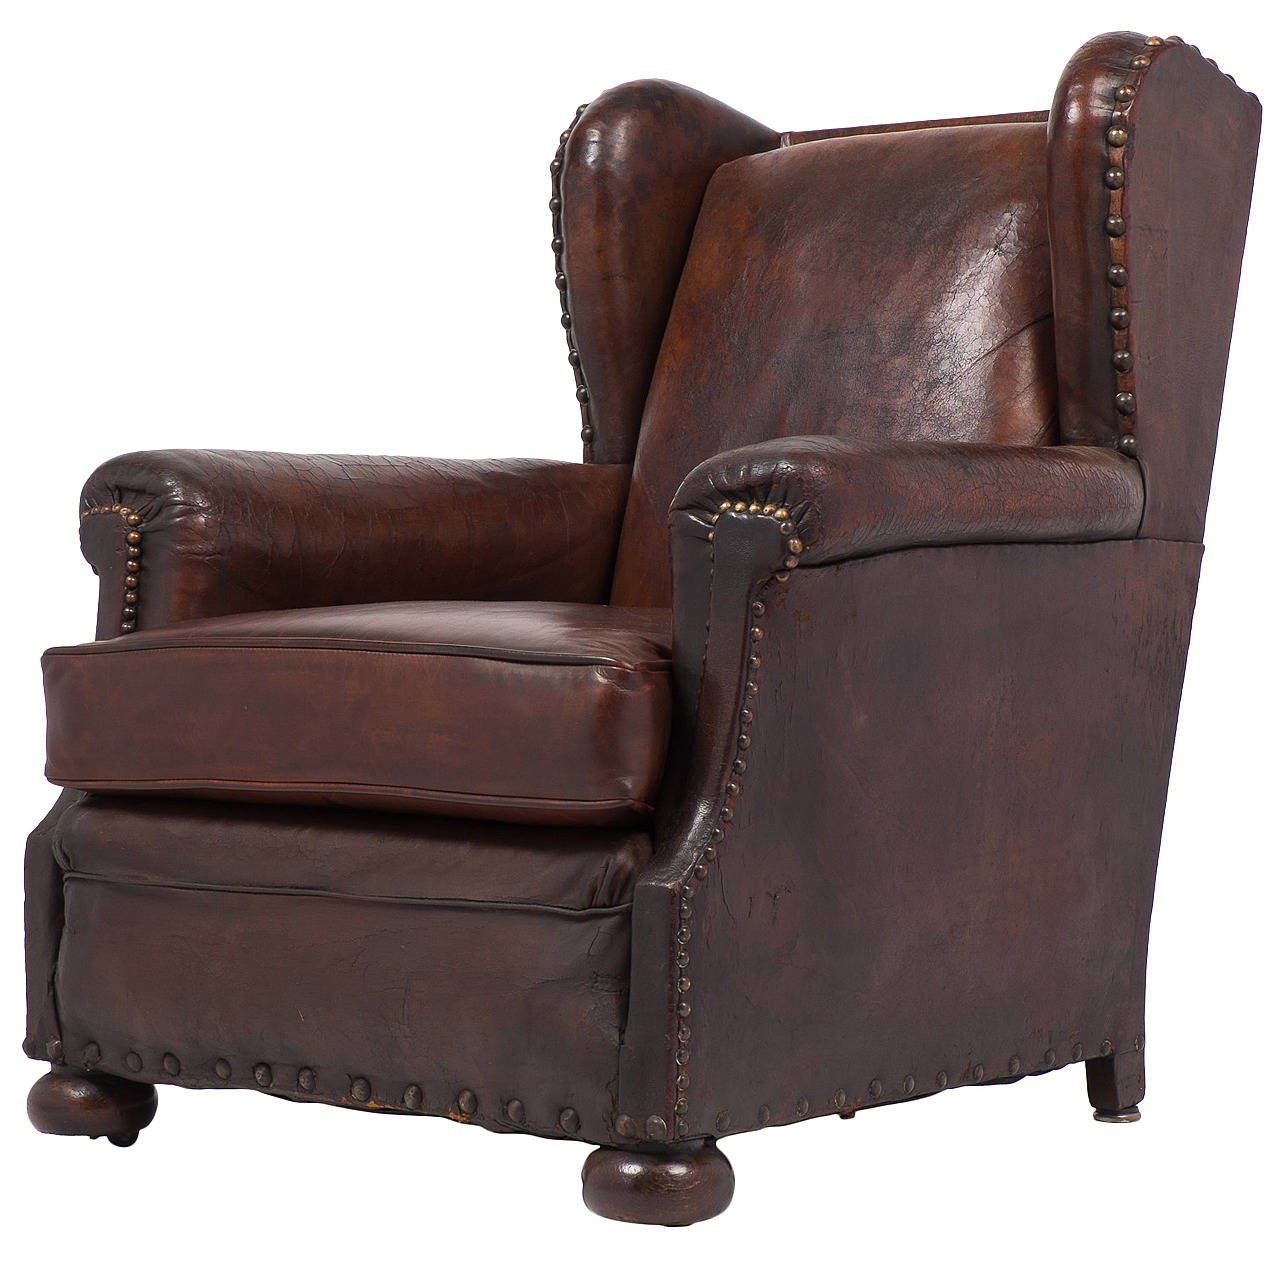 French Vintage Wingback Leather Club Chair For Sale at 1stdibs